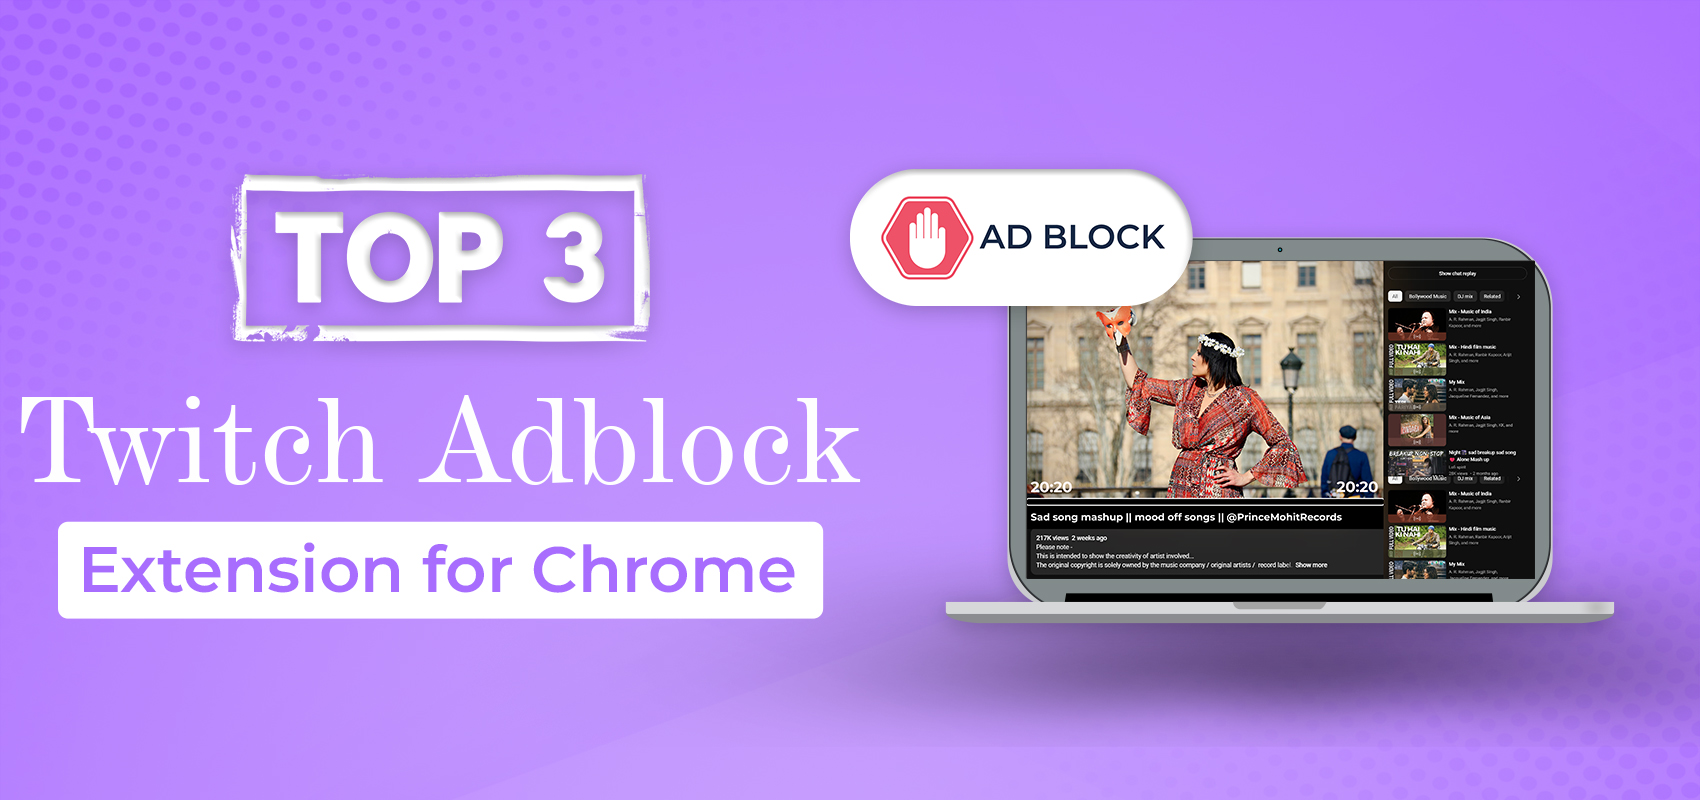 Top 3 Twitch adblock extension for Chrome